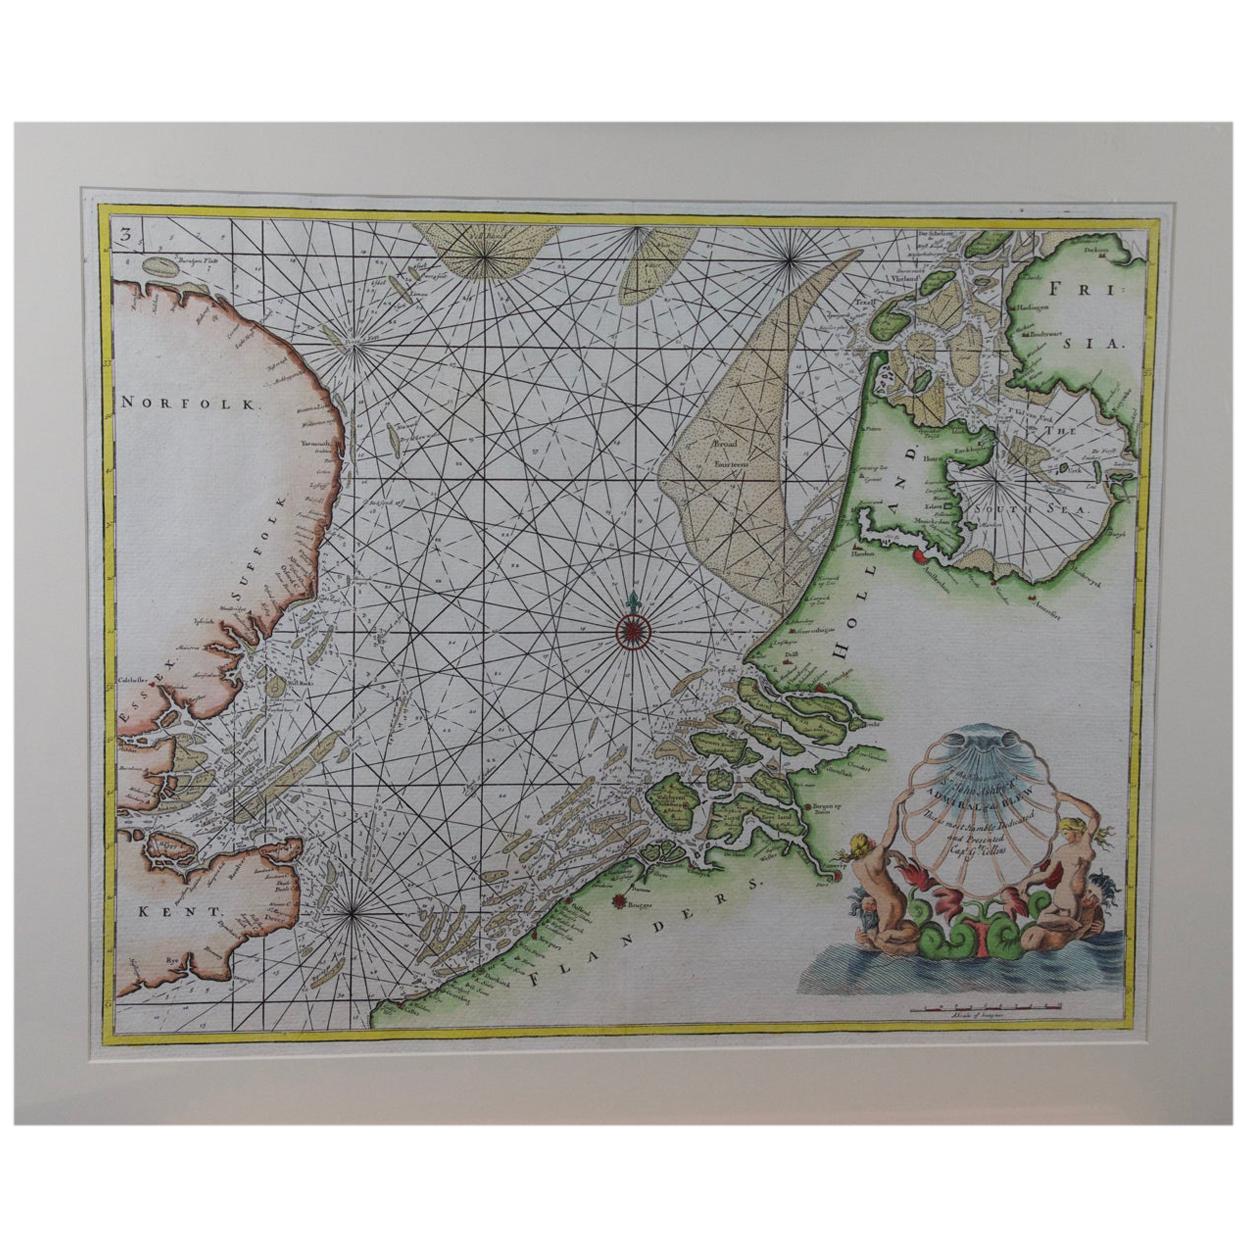 Flanders, Holland & Norfolk: Hand-Colored 17th Century Sea Chart by Collins